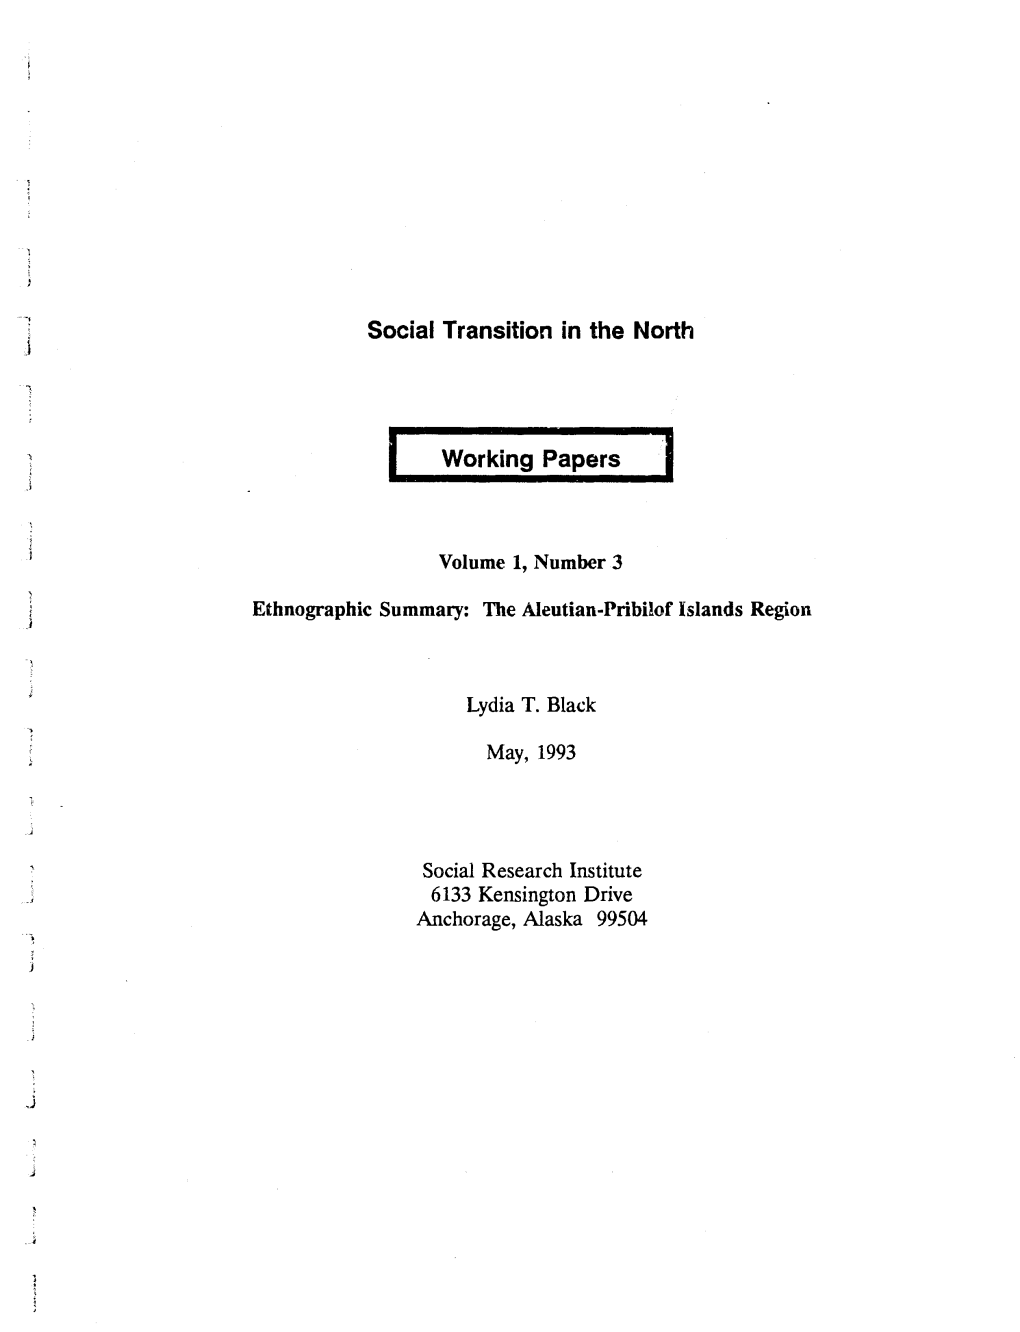 Social Transition in the North Working Papers, Vol. 1, No. 3, May 1993